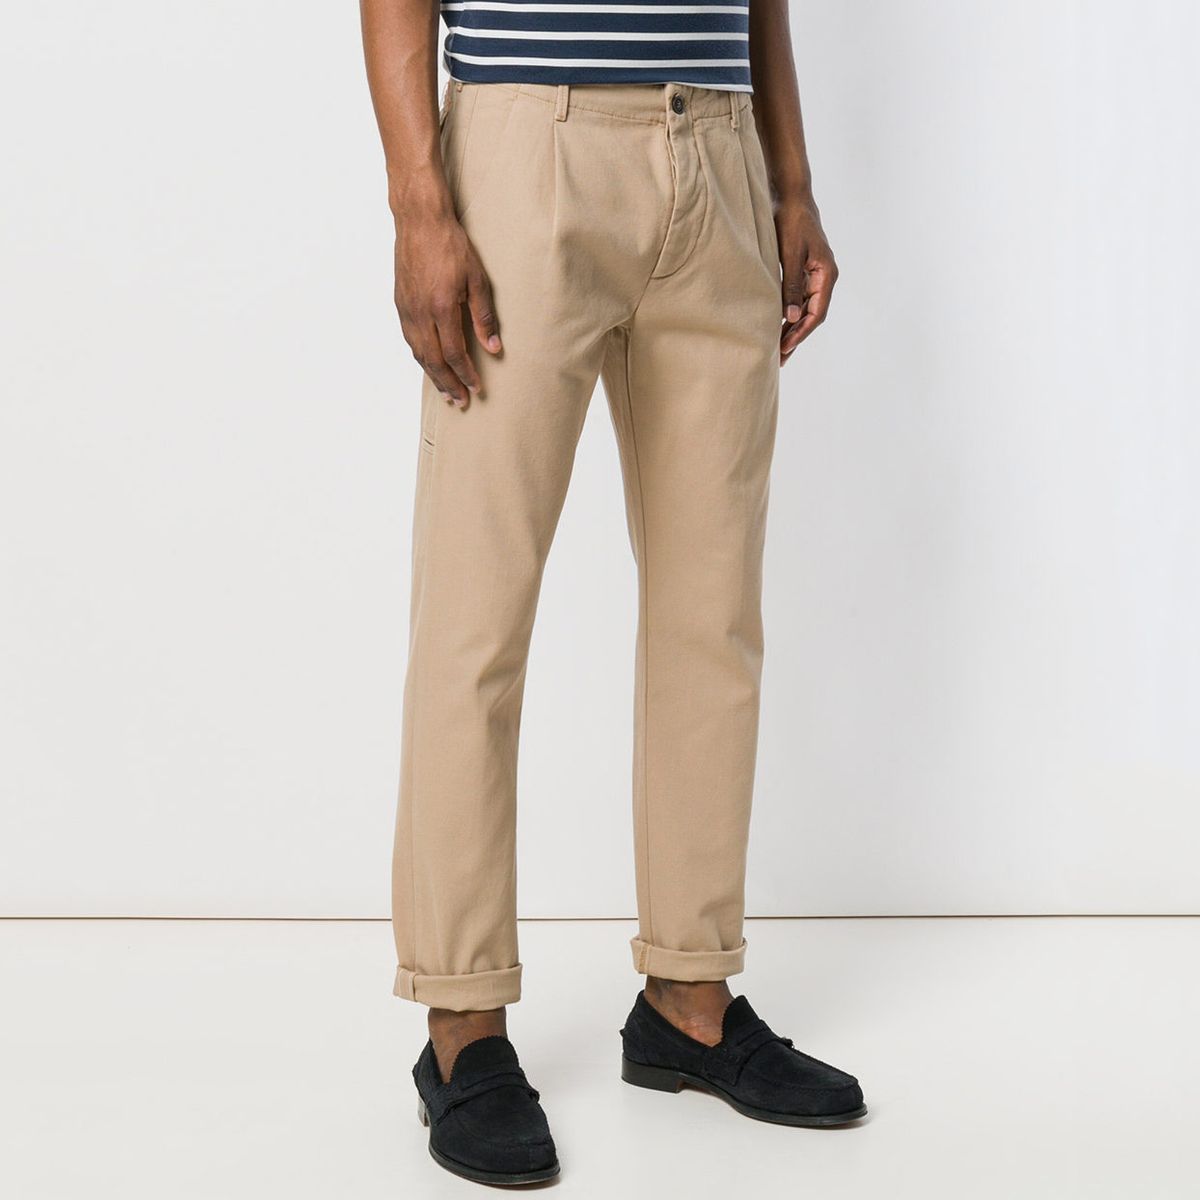 12 Best Chinos for Men 2020 | The 